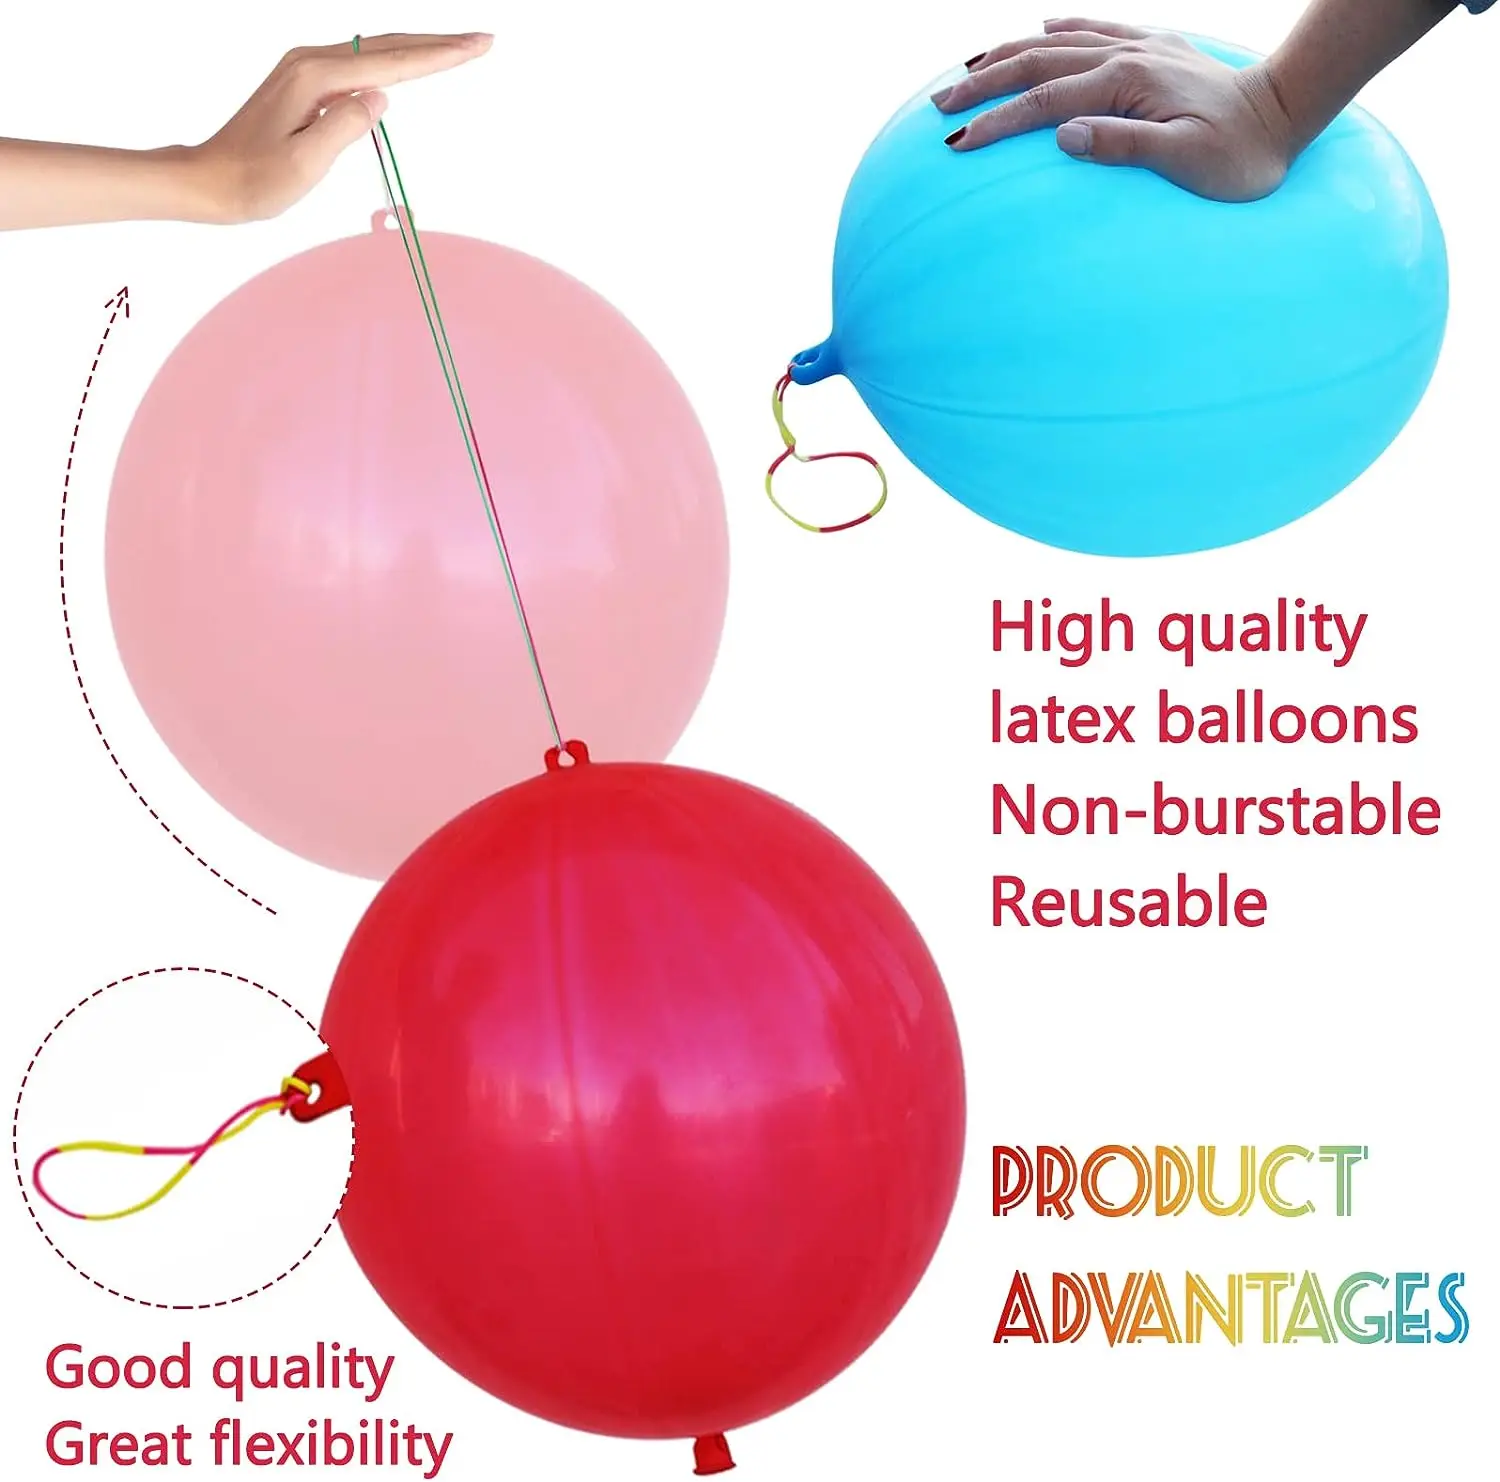 Punch Balloons Thickened Neon Punching Balloon Party Favors for Kids,Weddings,Classroom prize Supply Punch Balloons